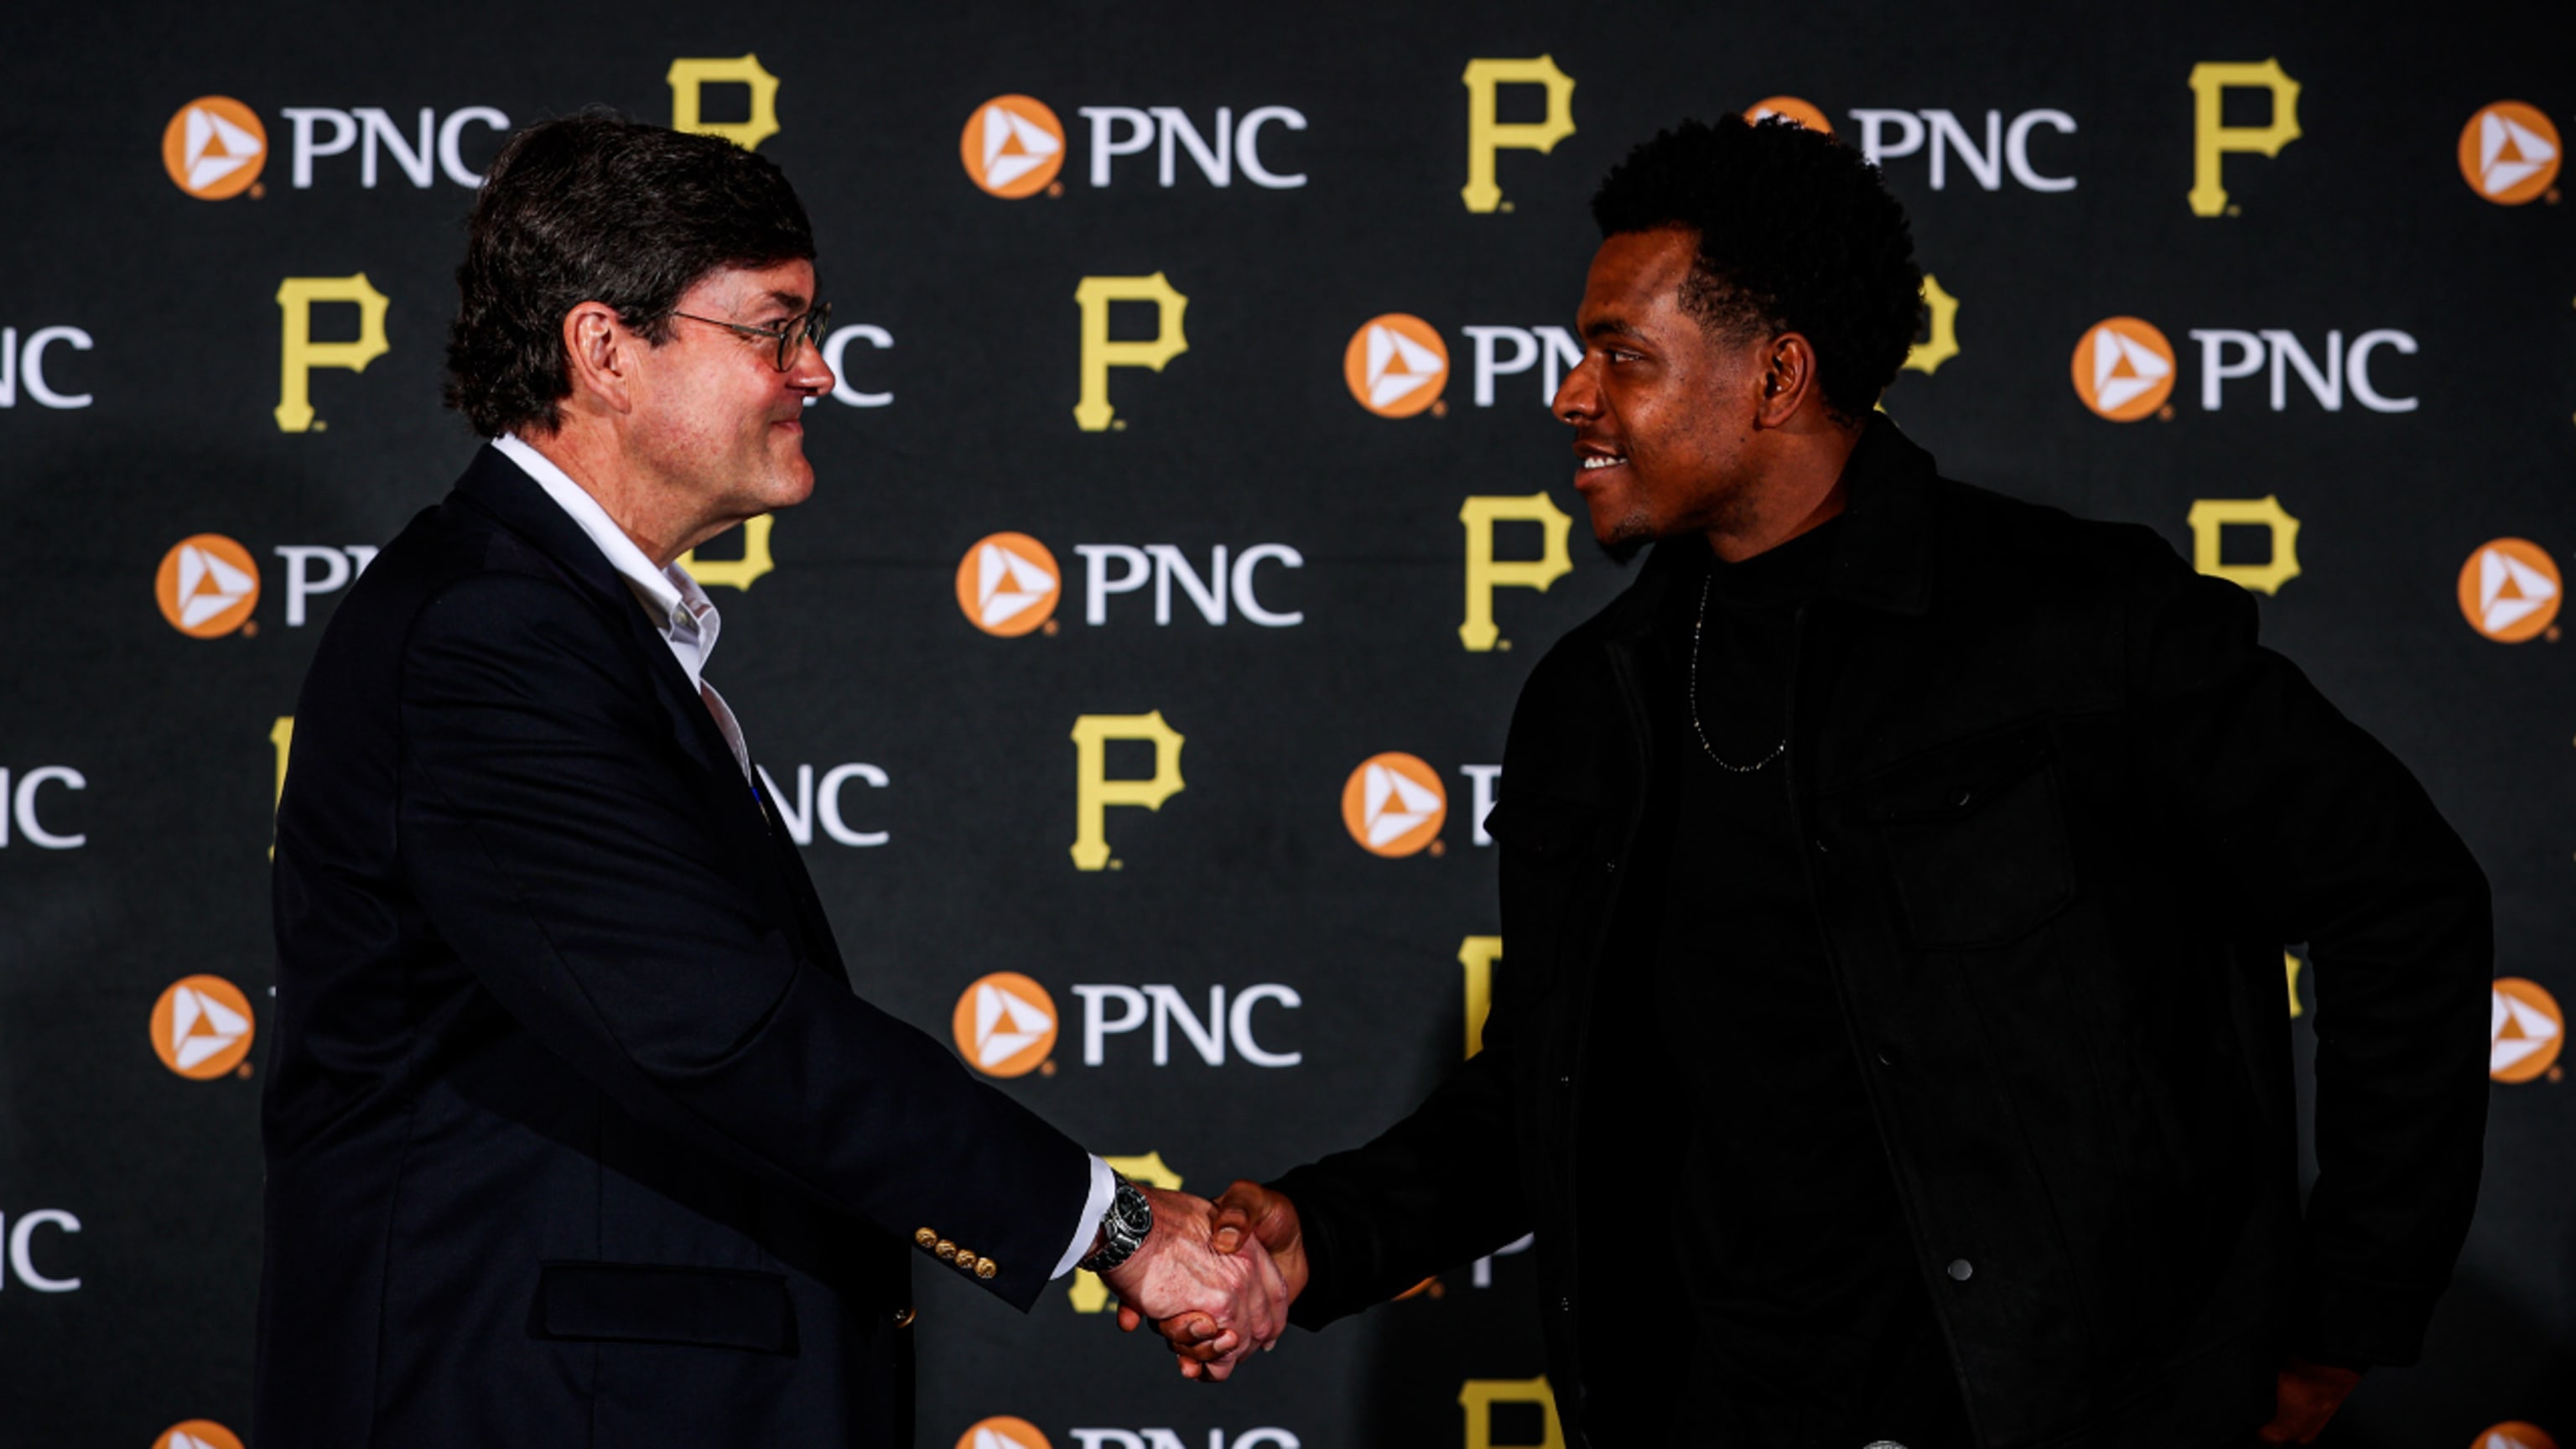 Ke'Bryan Hayes rejects Pirates' extension offer